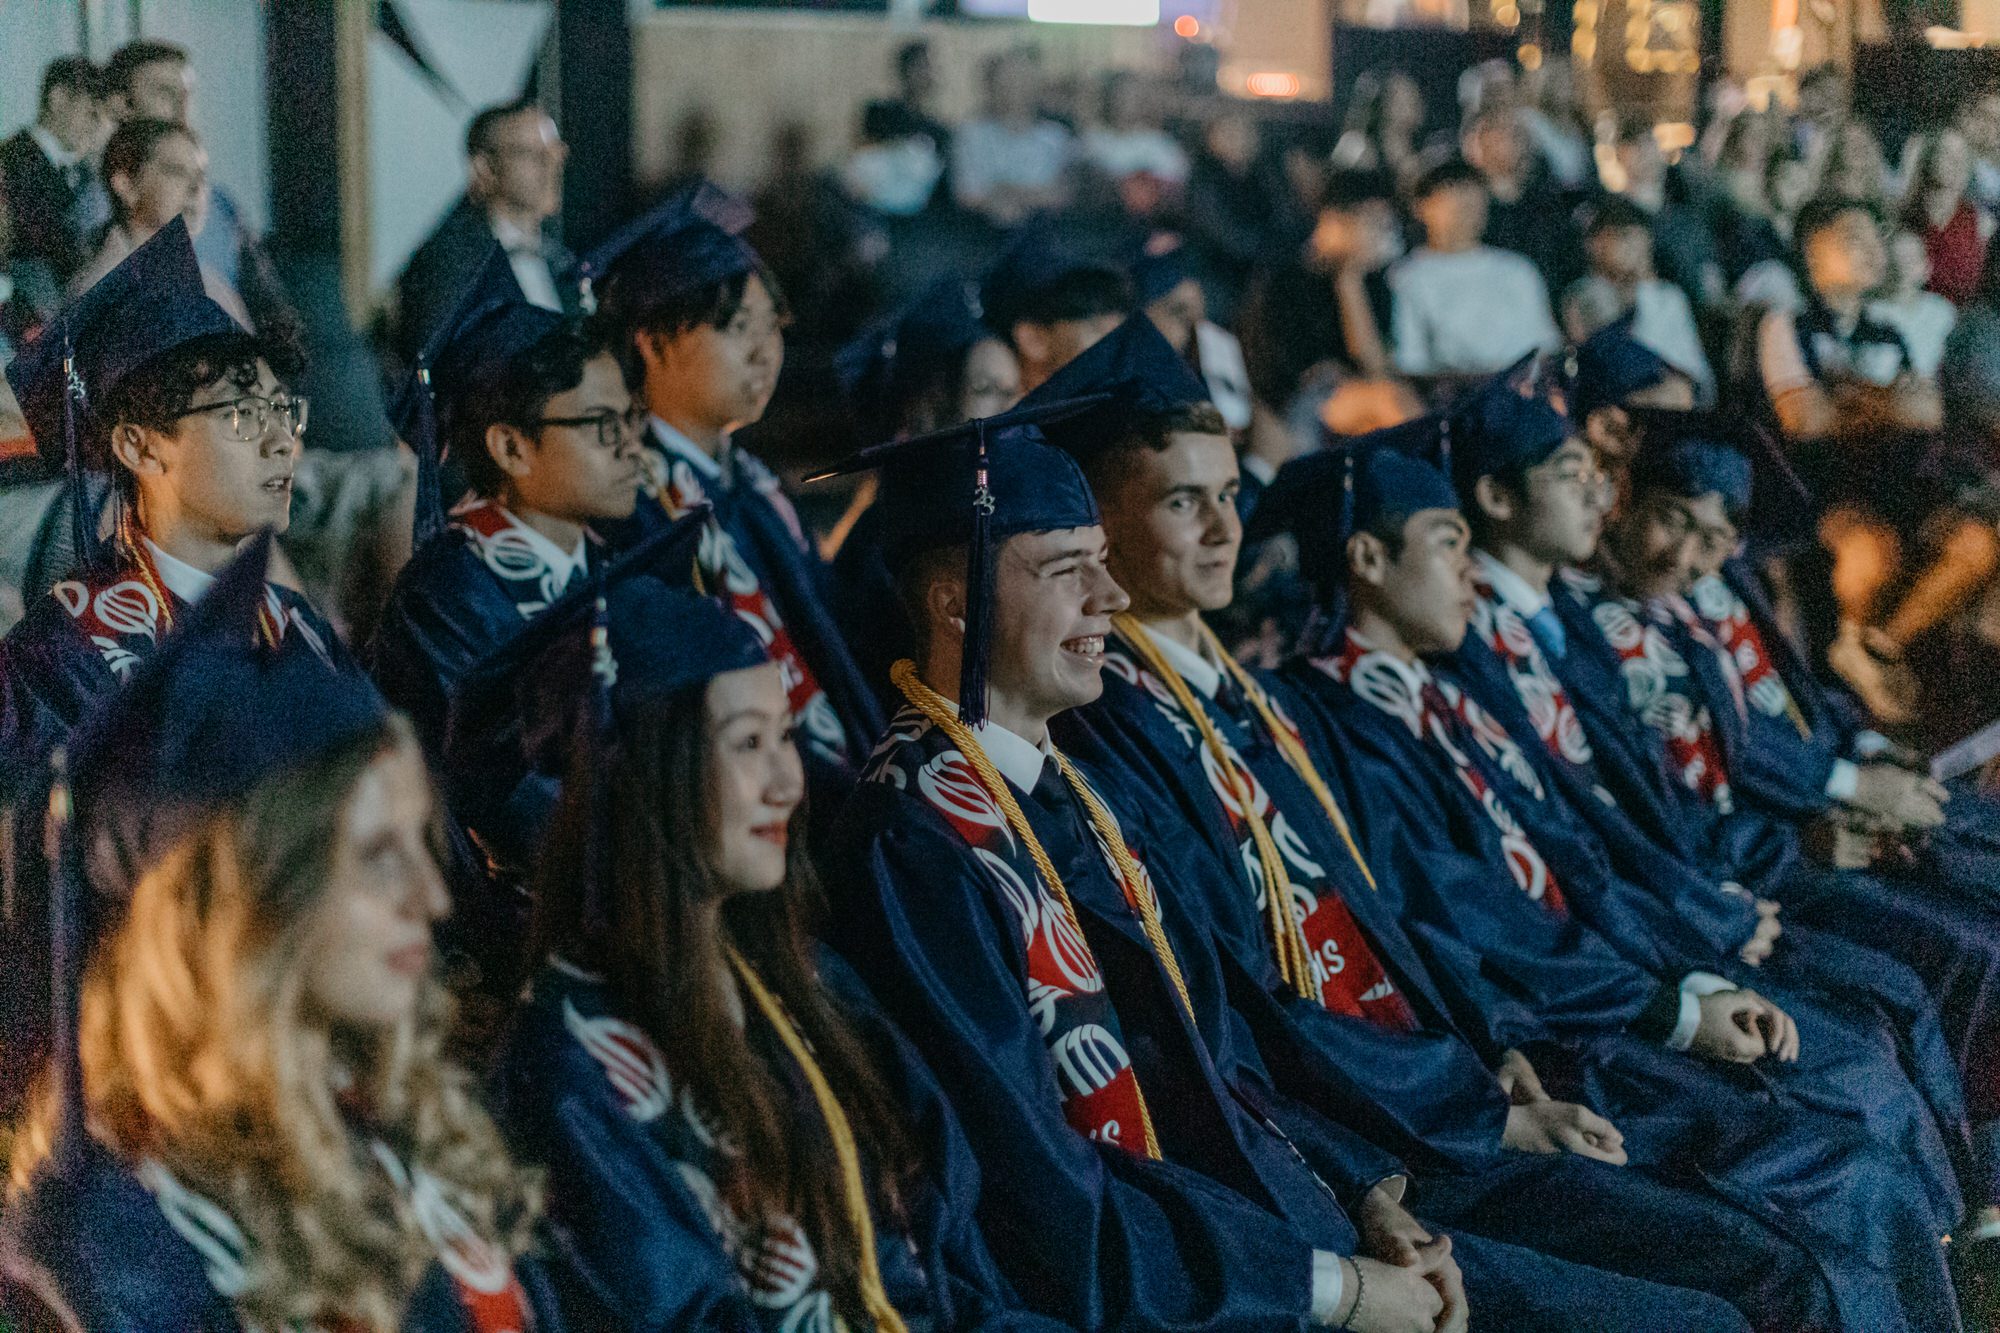 A group of graduates wearing graduation gowns and caps, celebrating their achievement at Oasis International School Kuala Lumpur 2023.